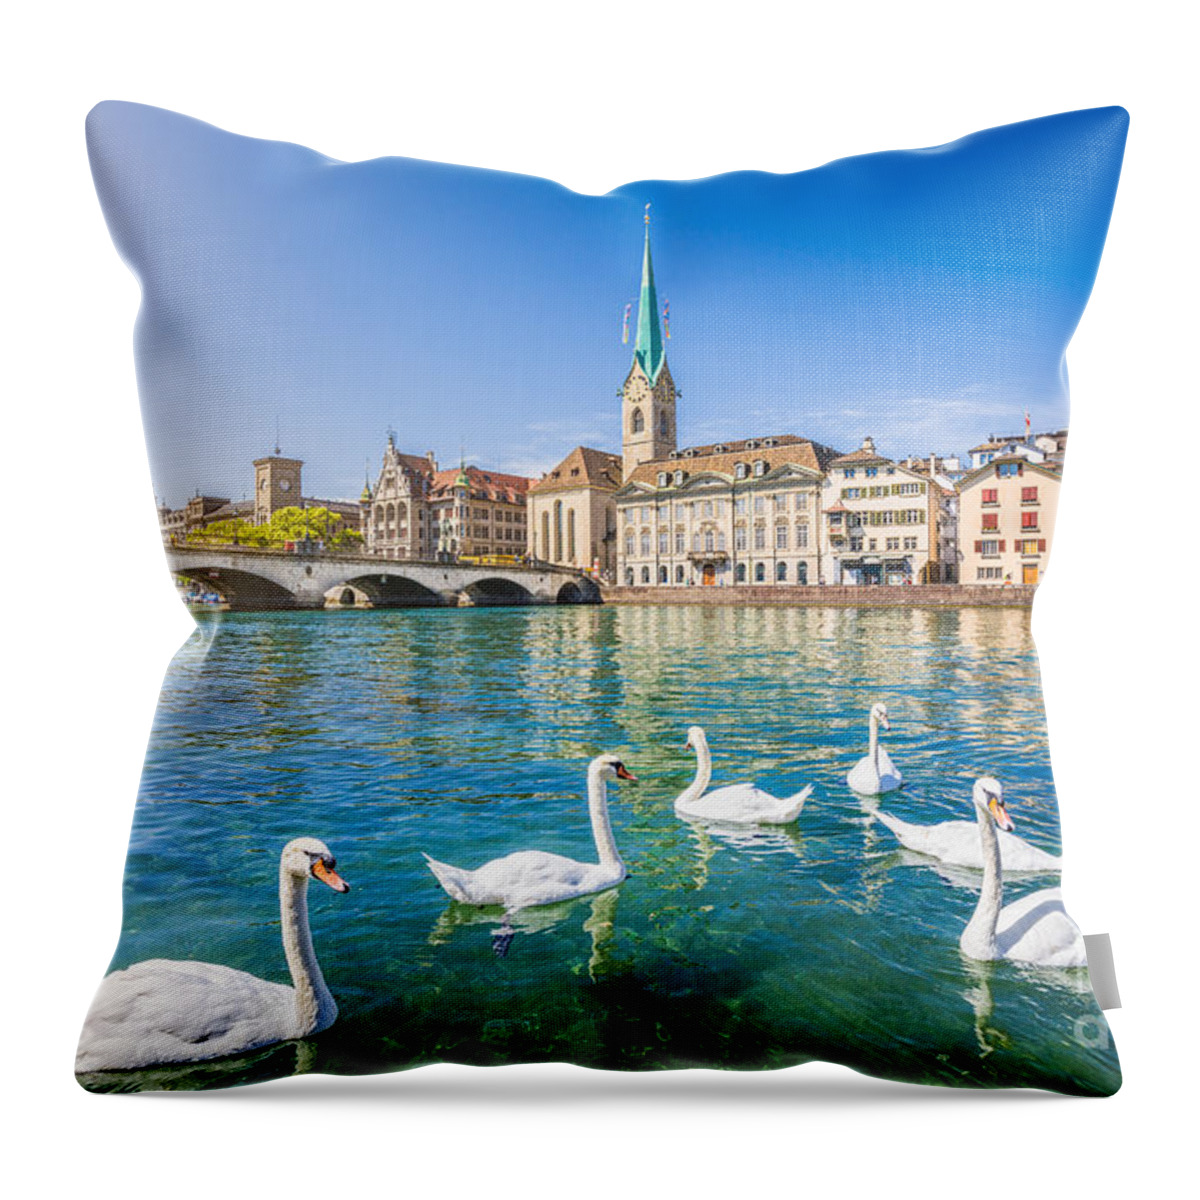 Alps Throw Pillow featuring the photograph Zurich #4 by JR Photography